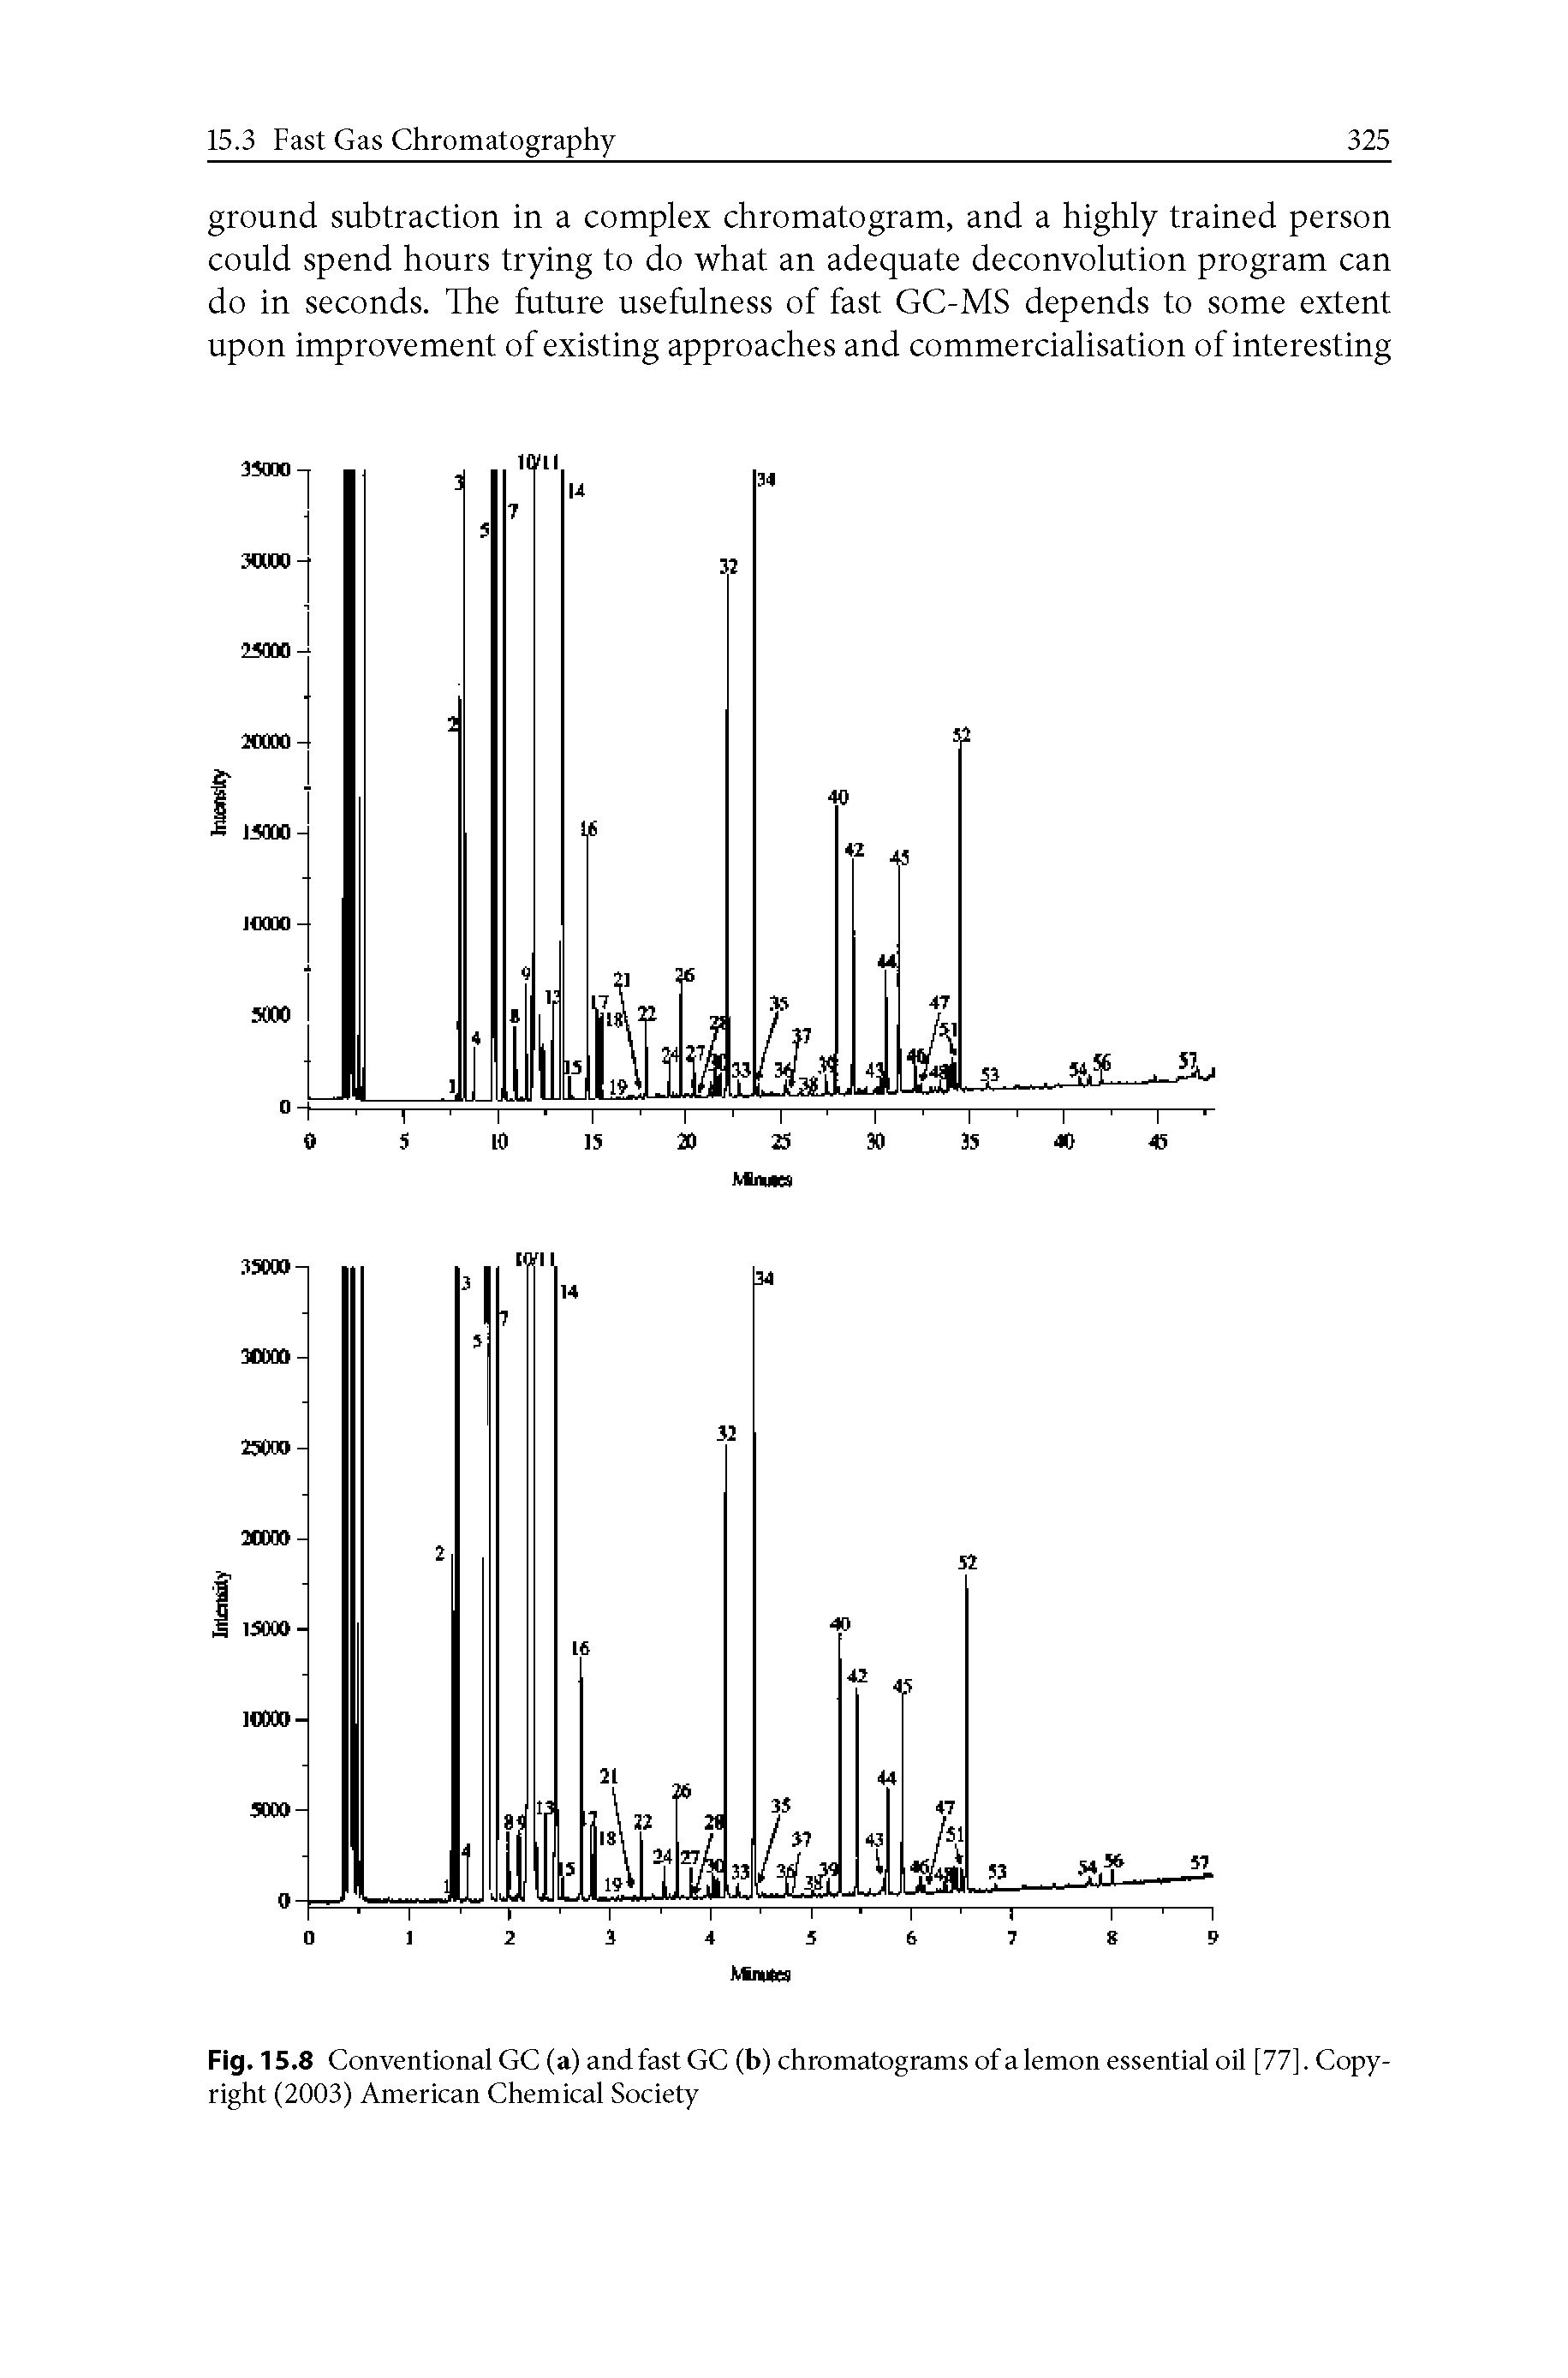 Fig. 15.8 Conventional GC (a) and fast GC (b) chromatograms of a lemon essential oil [77]. Copyright (2003) American Chemical Society...